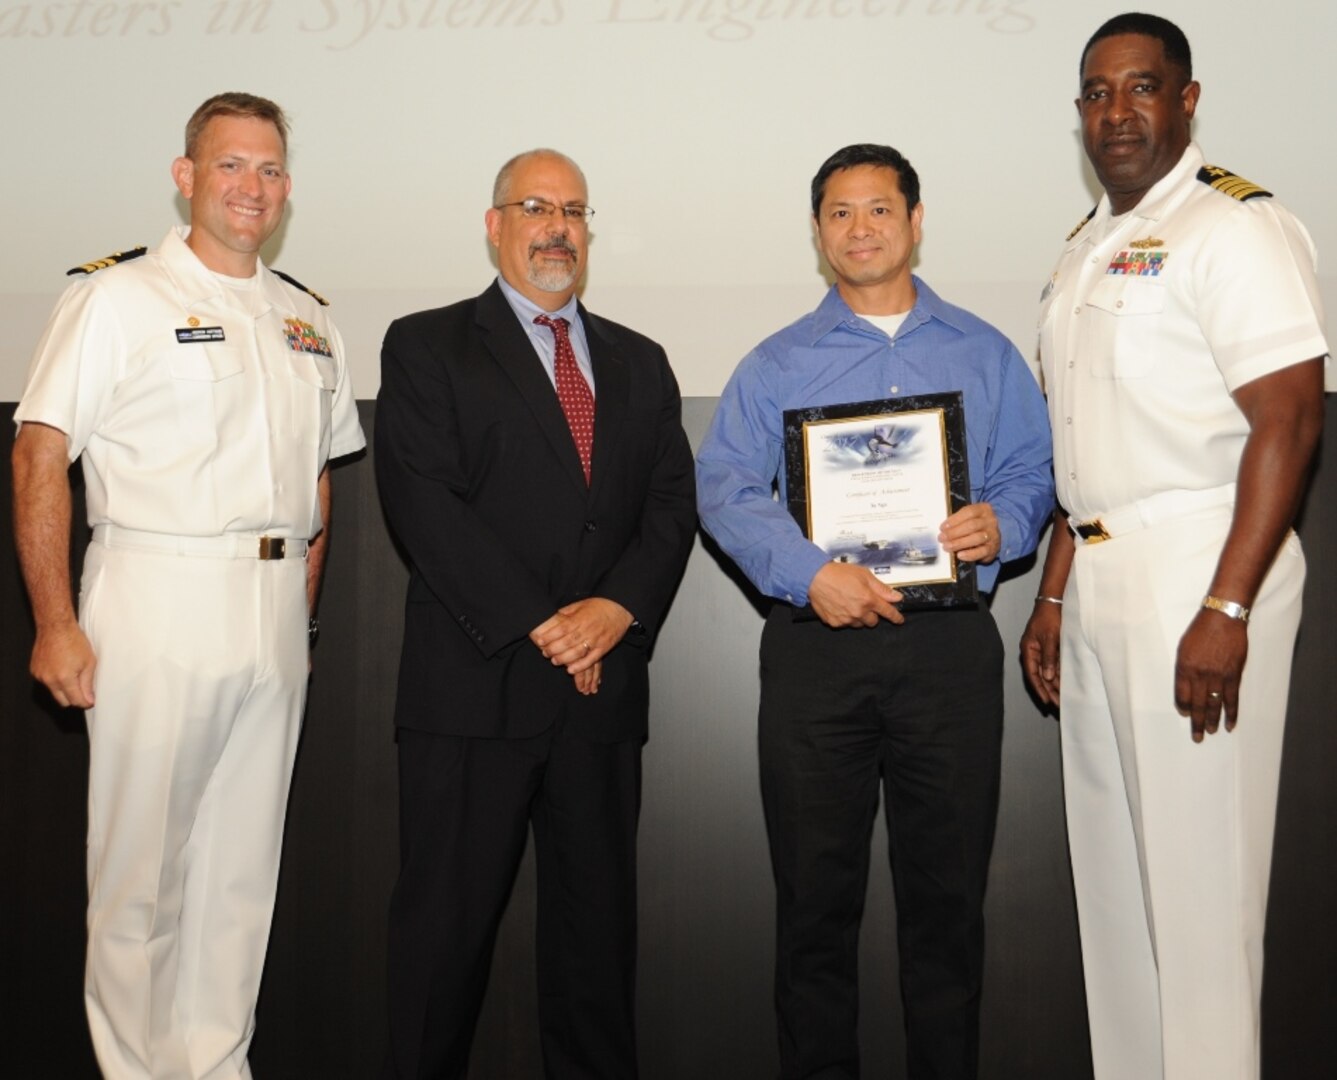 IMAGE: DAHLGREN, Va. - Tu Ngo receives his certificate of achievement from Naval Surface Warfare Center Dahlgren Division (NSWCDD) Technical Director John Fiore, NSWCDD Commanding Officer Capt. Godfrey 'Gus' Weekes, right, and Combat Direction Systems Activity Dam Neck Commanding Officer Cmdr. Andrew Hoffman at the 2017 NSWCDD academic awards ceremony. Ngo was recognized for completing his master's in systems engineering from the Naval Postgraduate School, and commended for his commitment to personal and professional development.